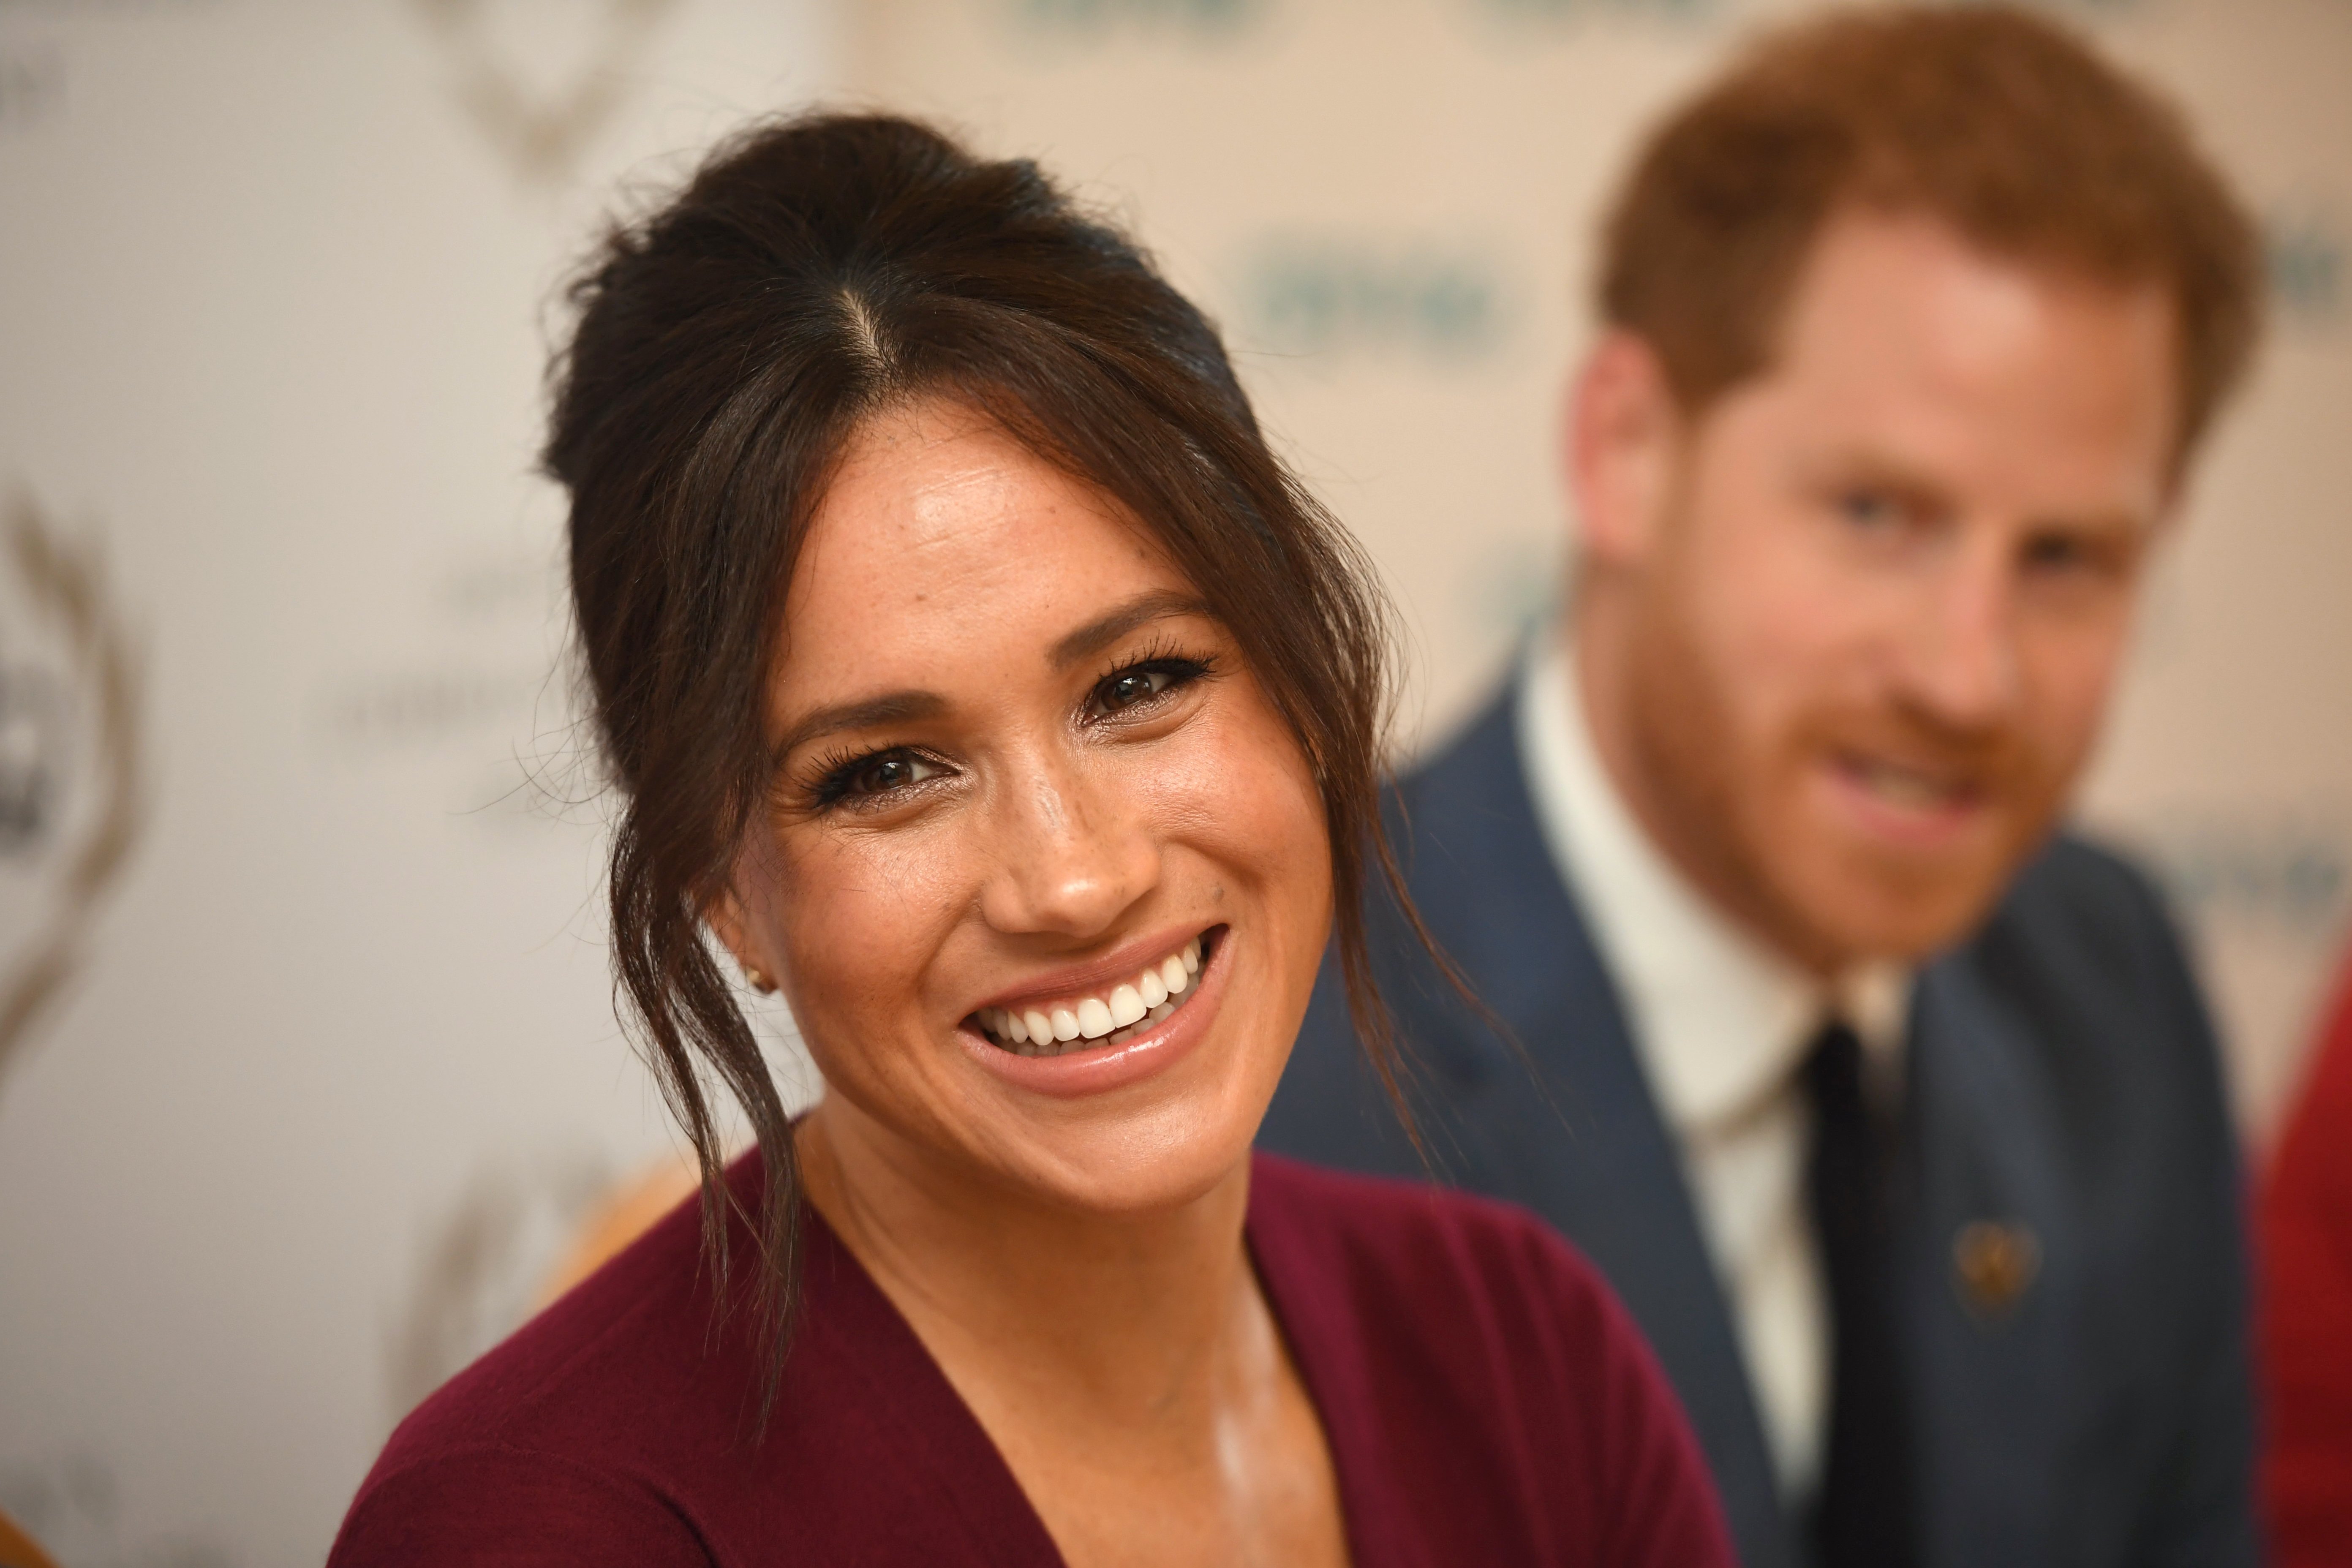 Meghan Markle Prince Harry attend a roundtable discussion on gender equality on October 25, 2019, in Windsor, England. | Source: Getty Images.